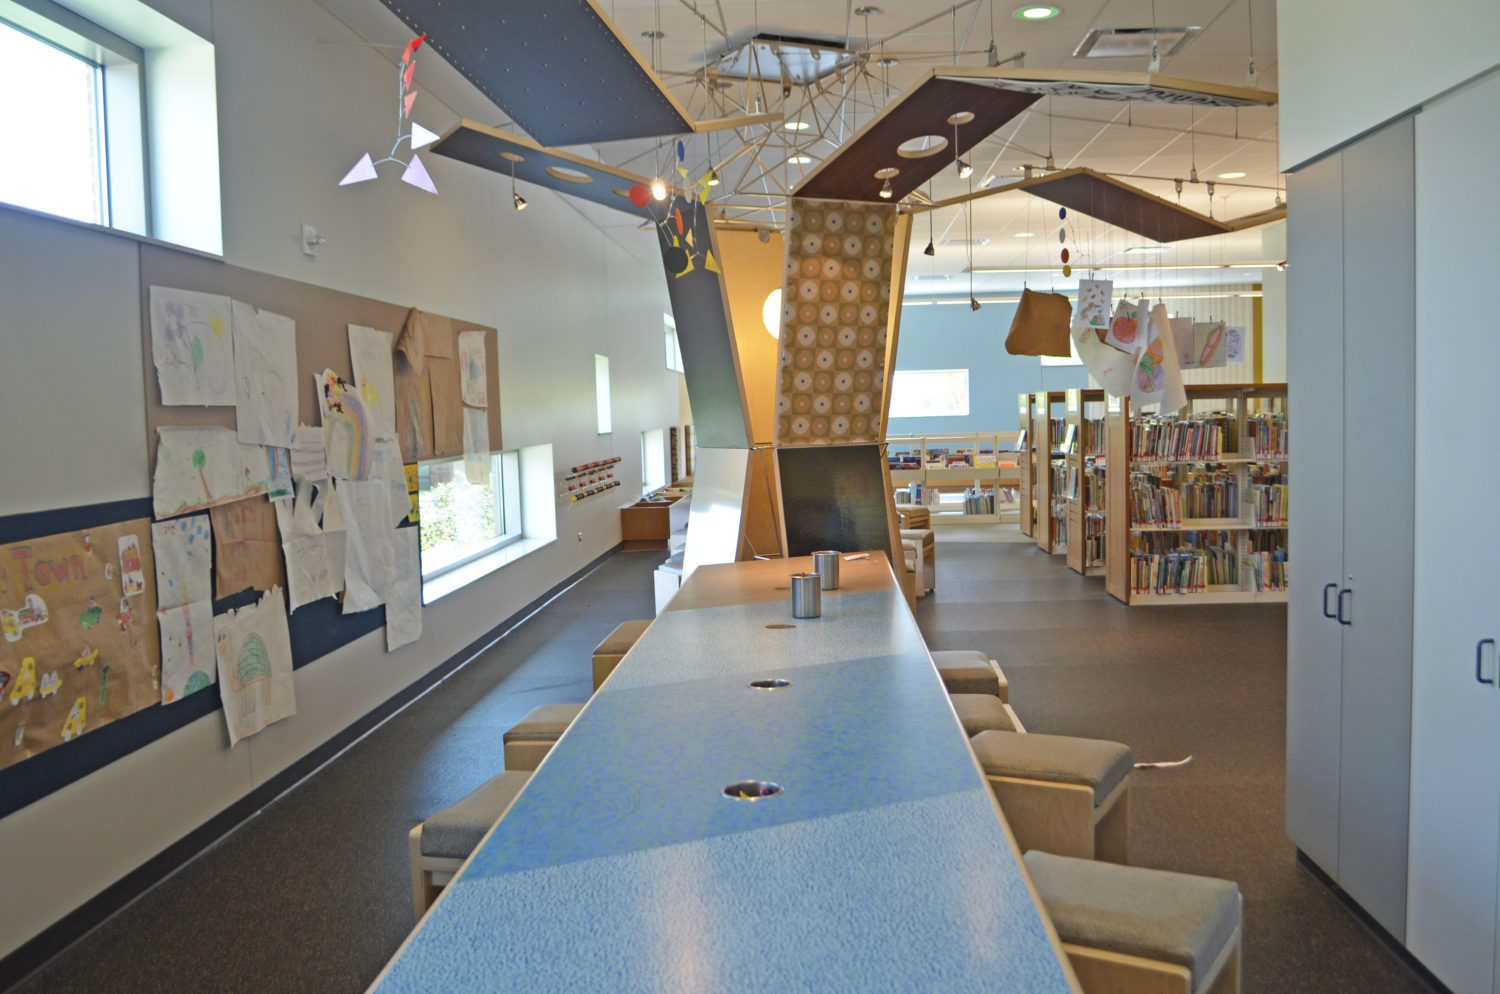 About Children&#8217;s Services, Fountaindale Public Library